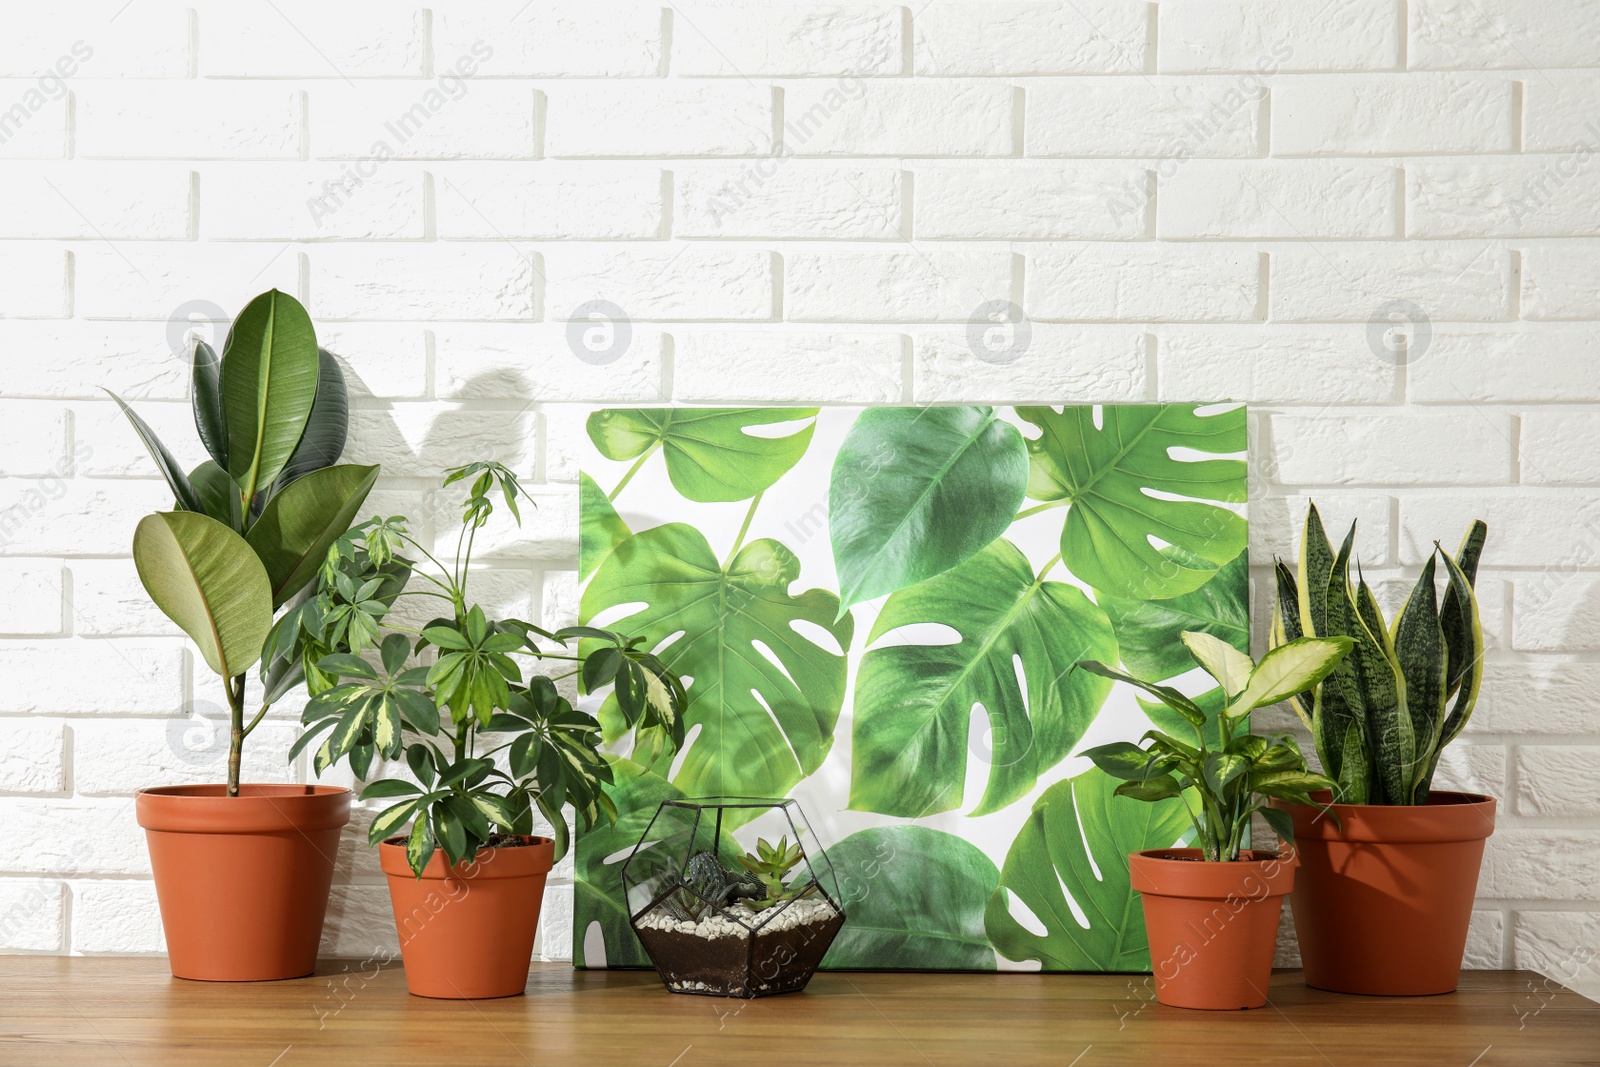 Photo of Potted home plants and picture on table against brick wall